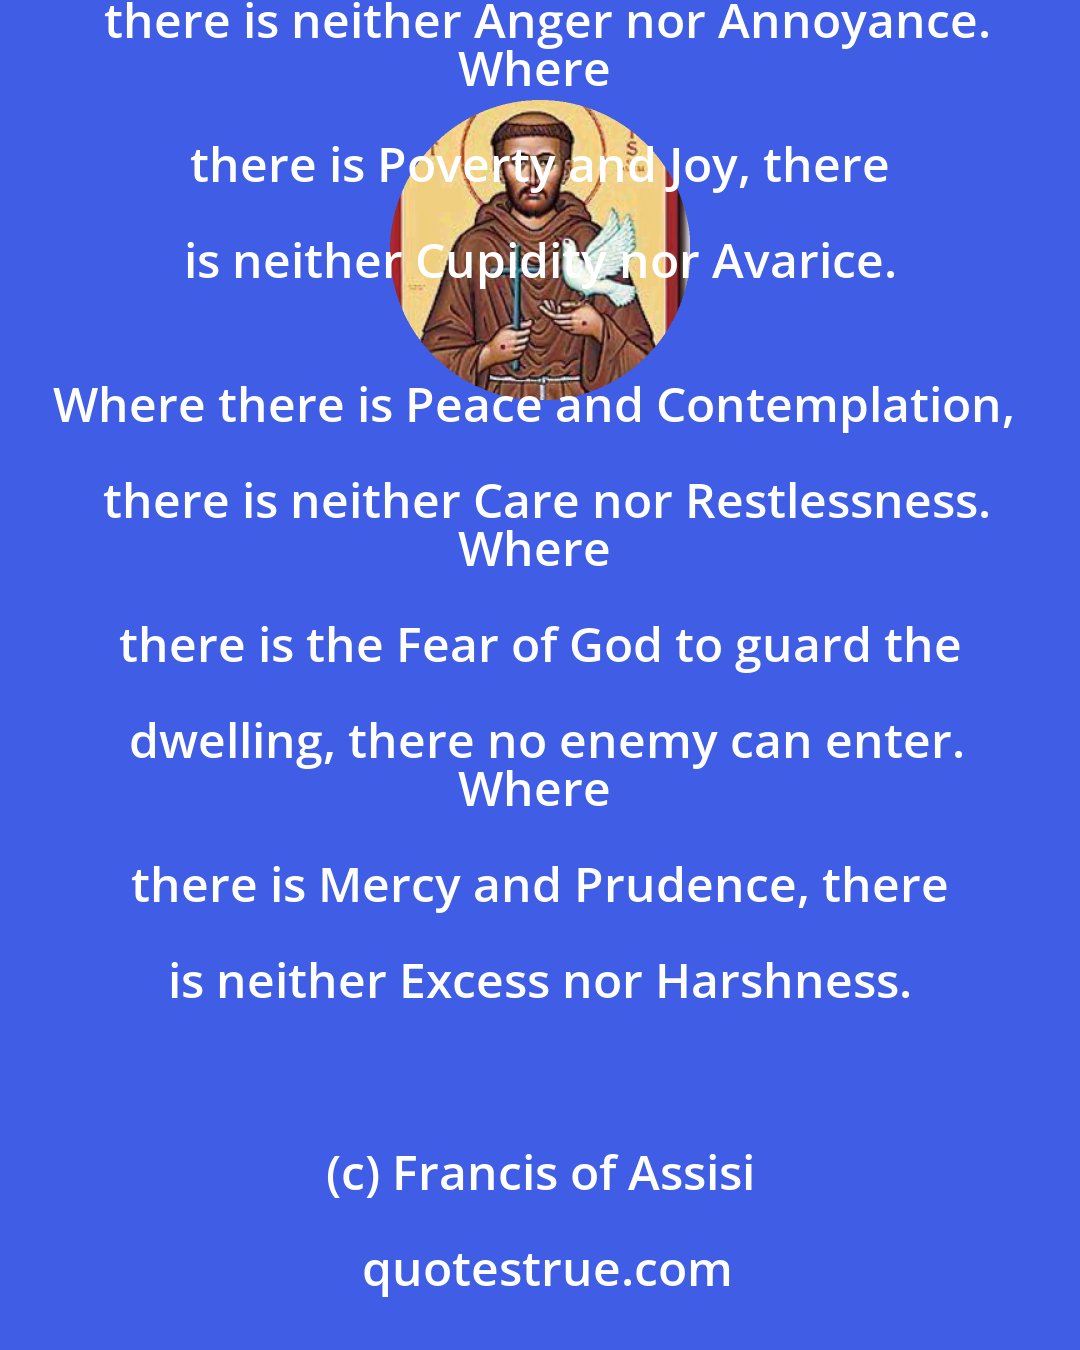 Francis of Assisi: Where there is Love and Wisdom, there is neither Fear nor Ignorance.
Where there is Patience and Humility, there is neither Anger nor Annoyance.
Where there is Poverty and Joy, there is neither Cupidity nor Avarice. 
Where there is Peace and Contemplation, there is neither Care nor Restlessness.
Where there is the Fear of God to guard the dwelling, there no enemy can enter.
Where there is Mercy and Prudence, there is neither Excess nor Harshness.